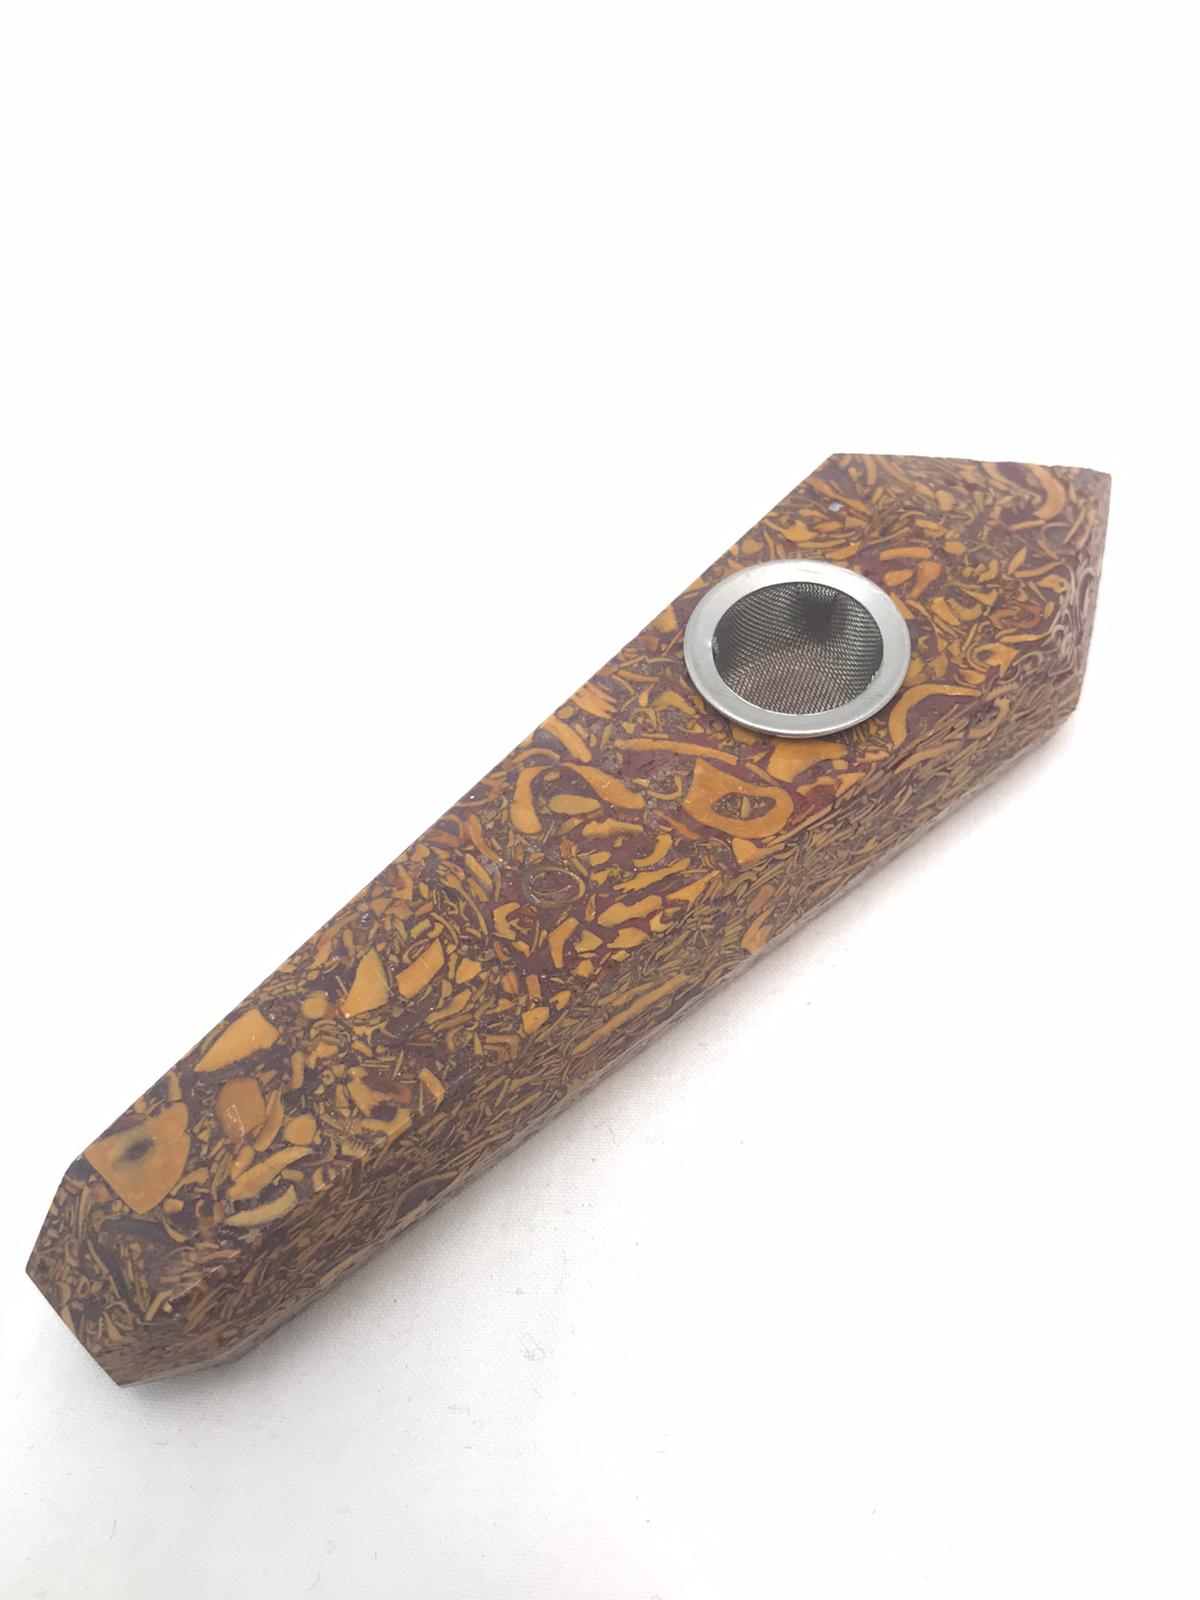 Real Natural healing stone pipe LIGHTER IMPERIAL JADE